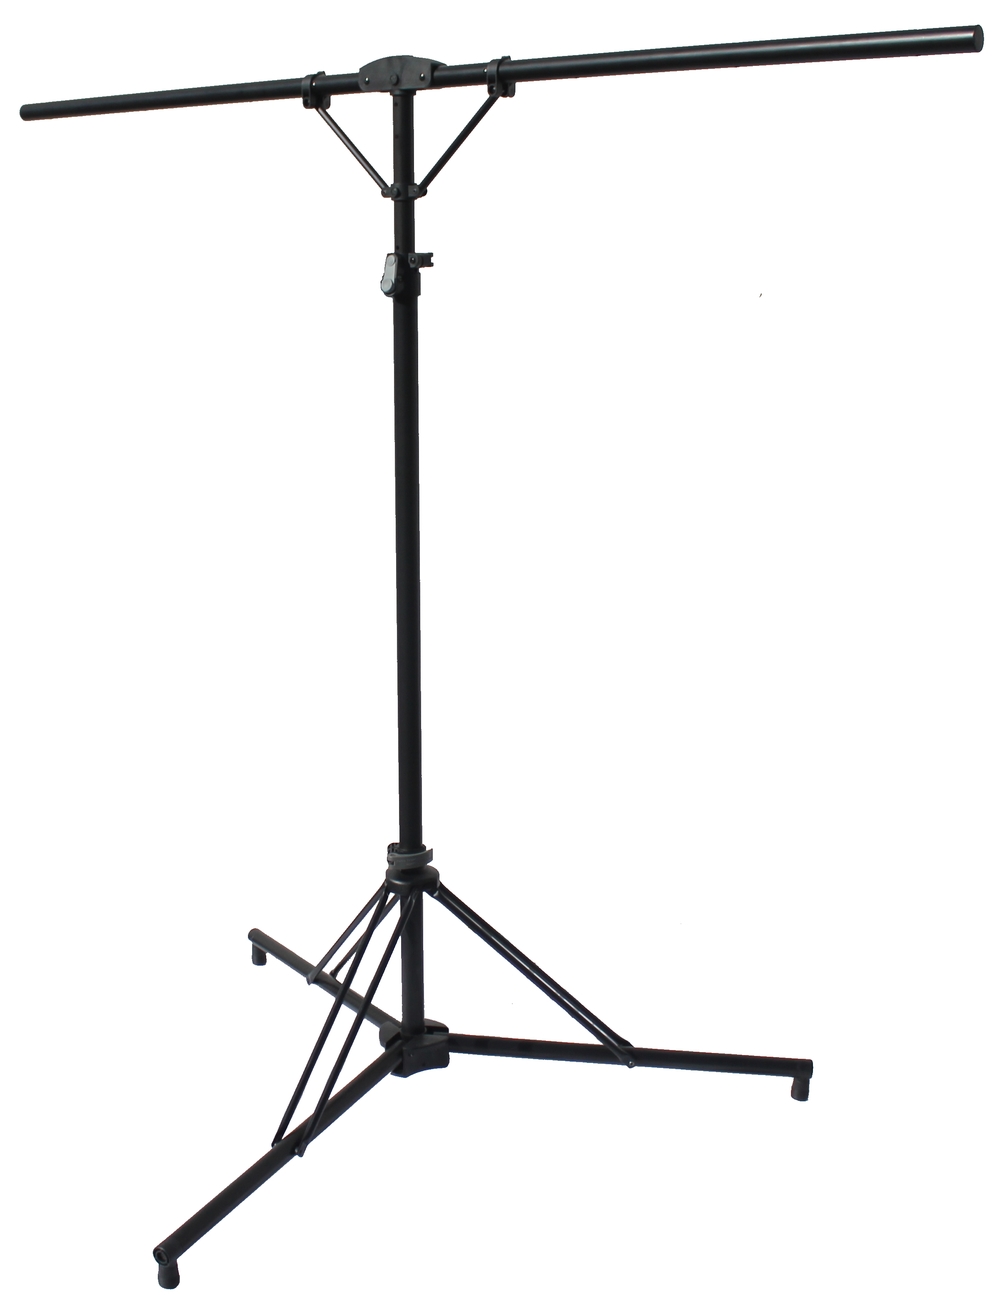 SG-20 Guitar Stand — Peak Stands-The Best Portable Stands